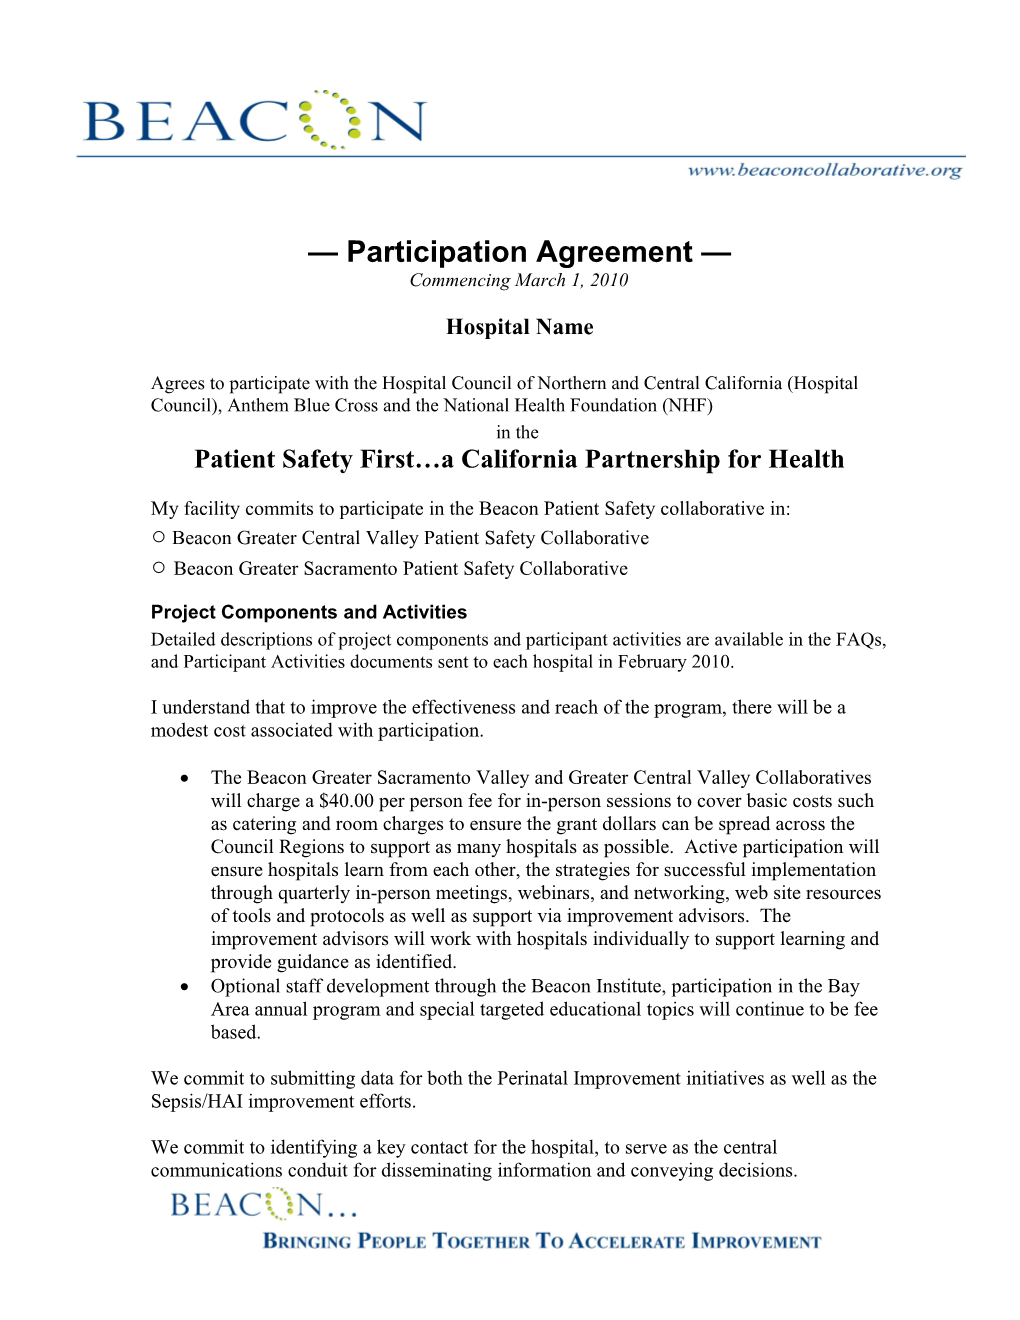 Patient Safety First a California Partnership for Health